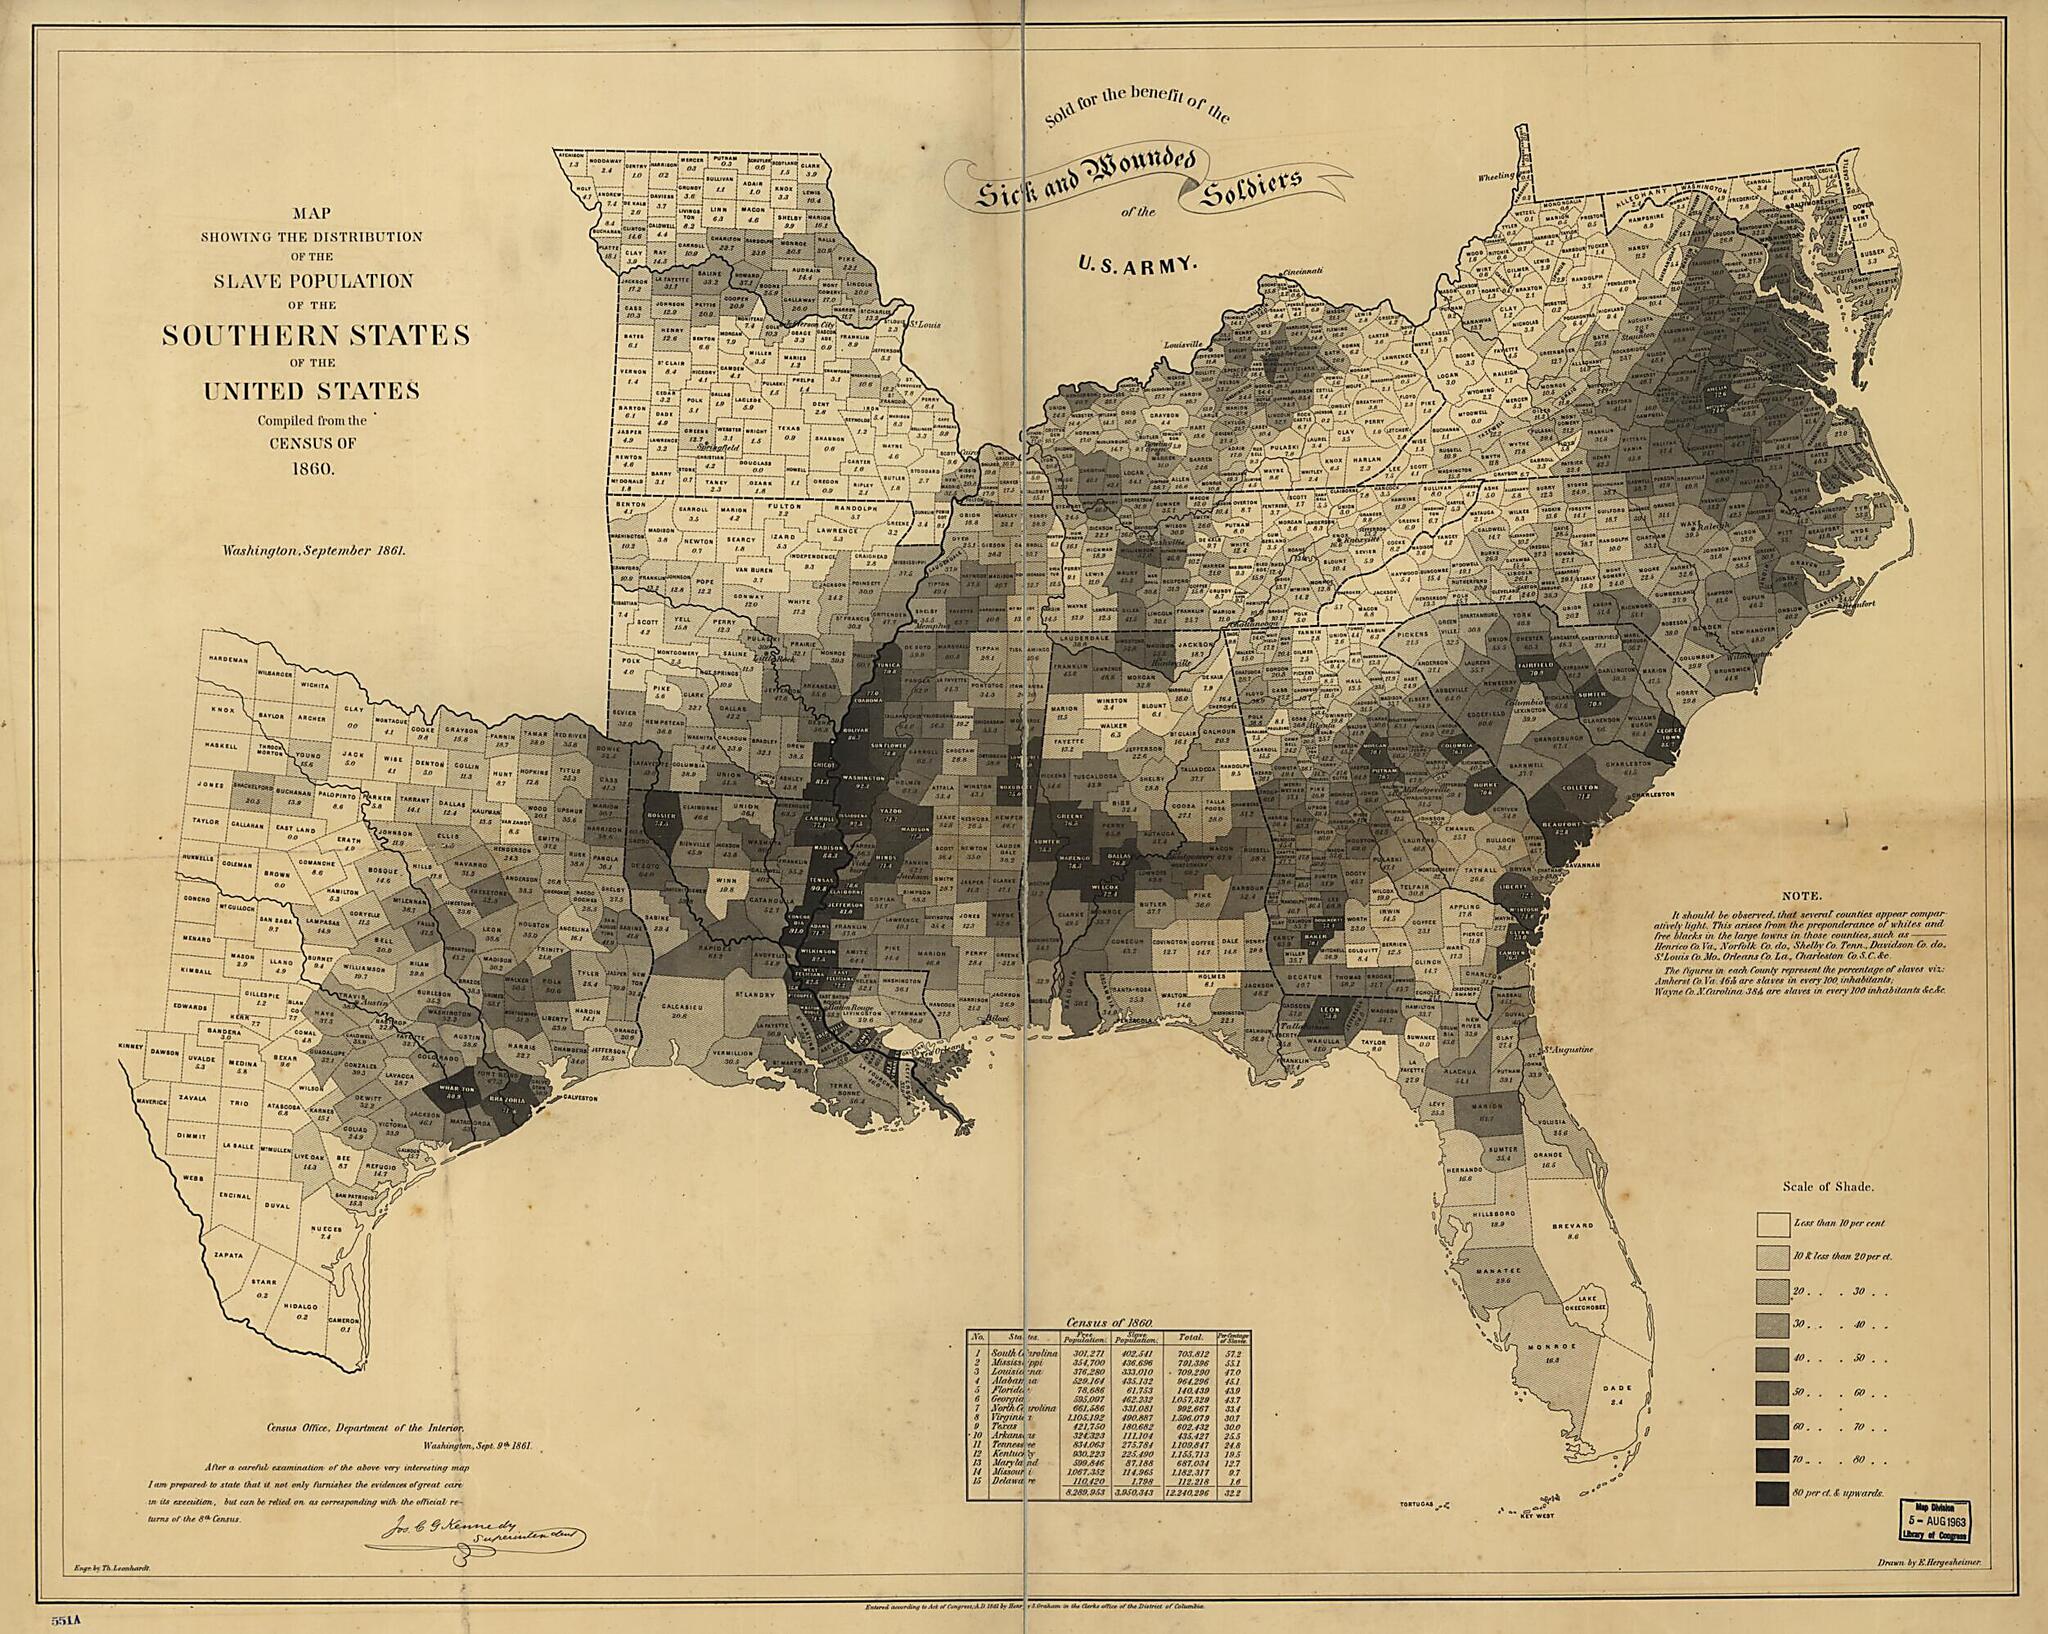 This old map of Map Showing the Distribution of the Slave Population of the Southern States of the United States. Compiled from the Census of 1860 from 1861 was created by E. (Edwin) Hergesheimer in 1861